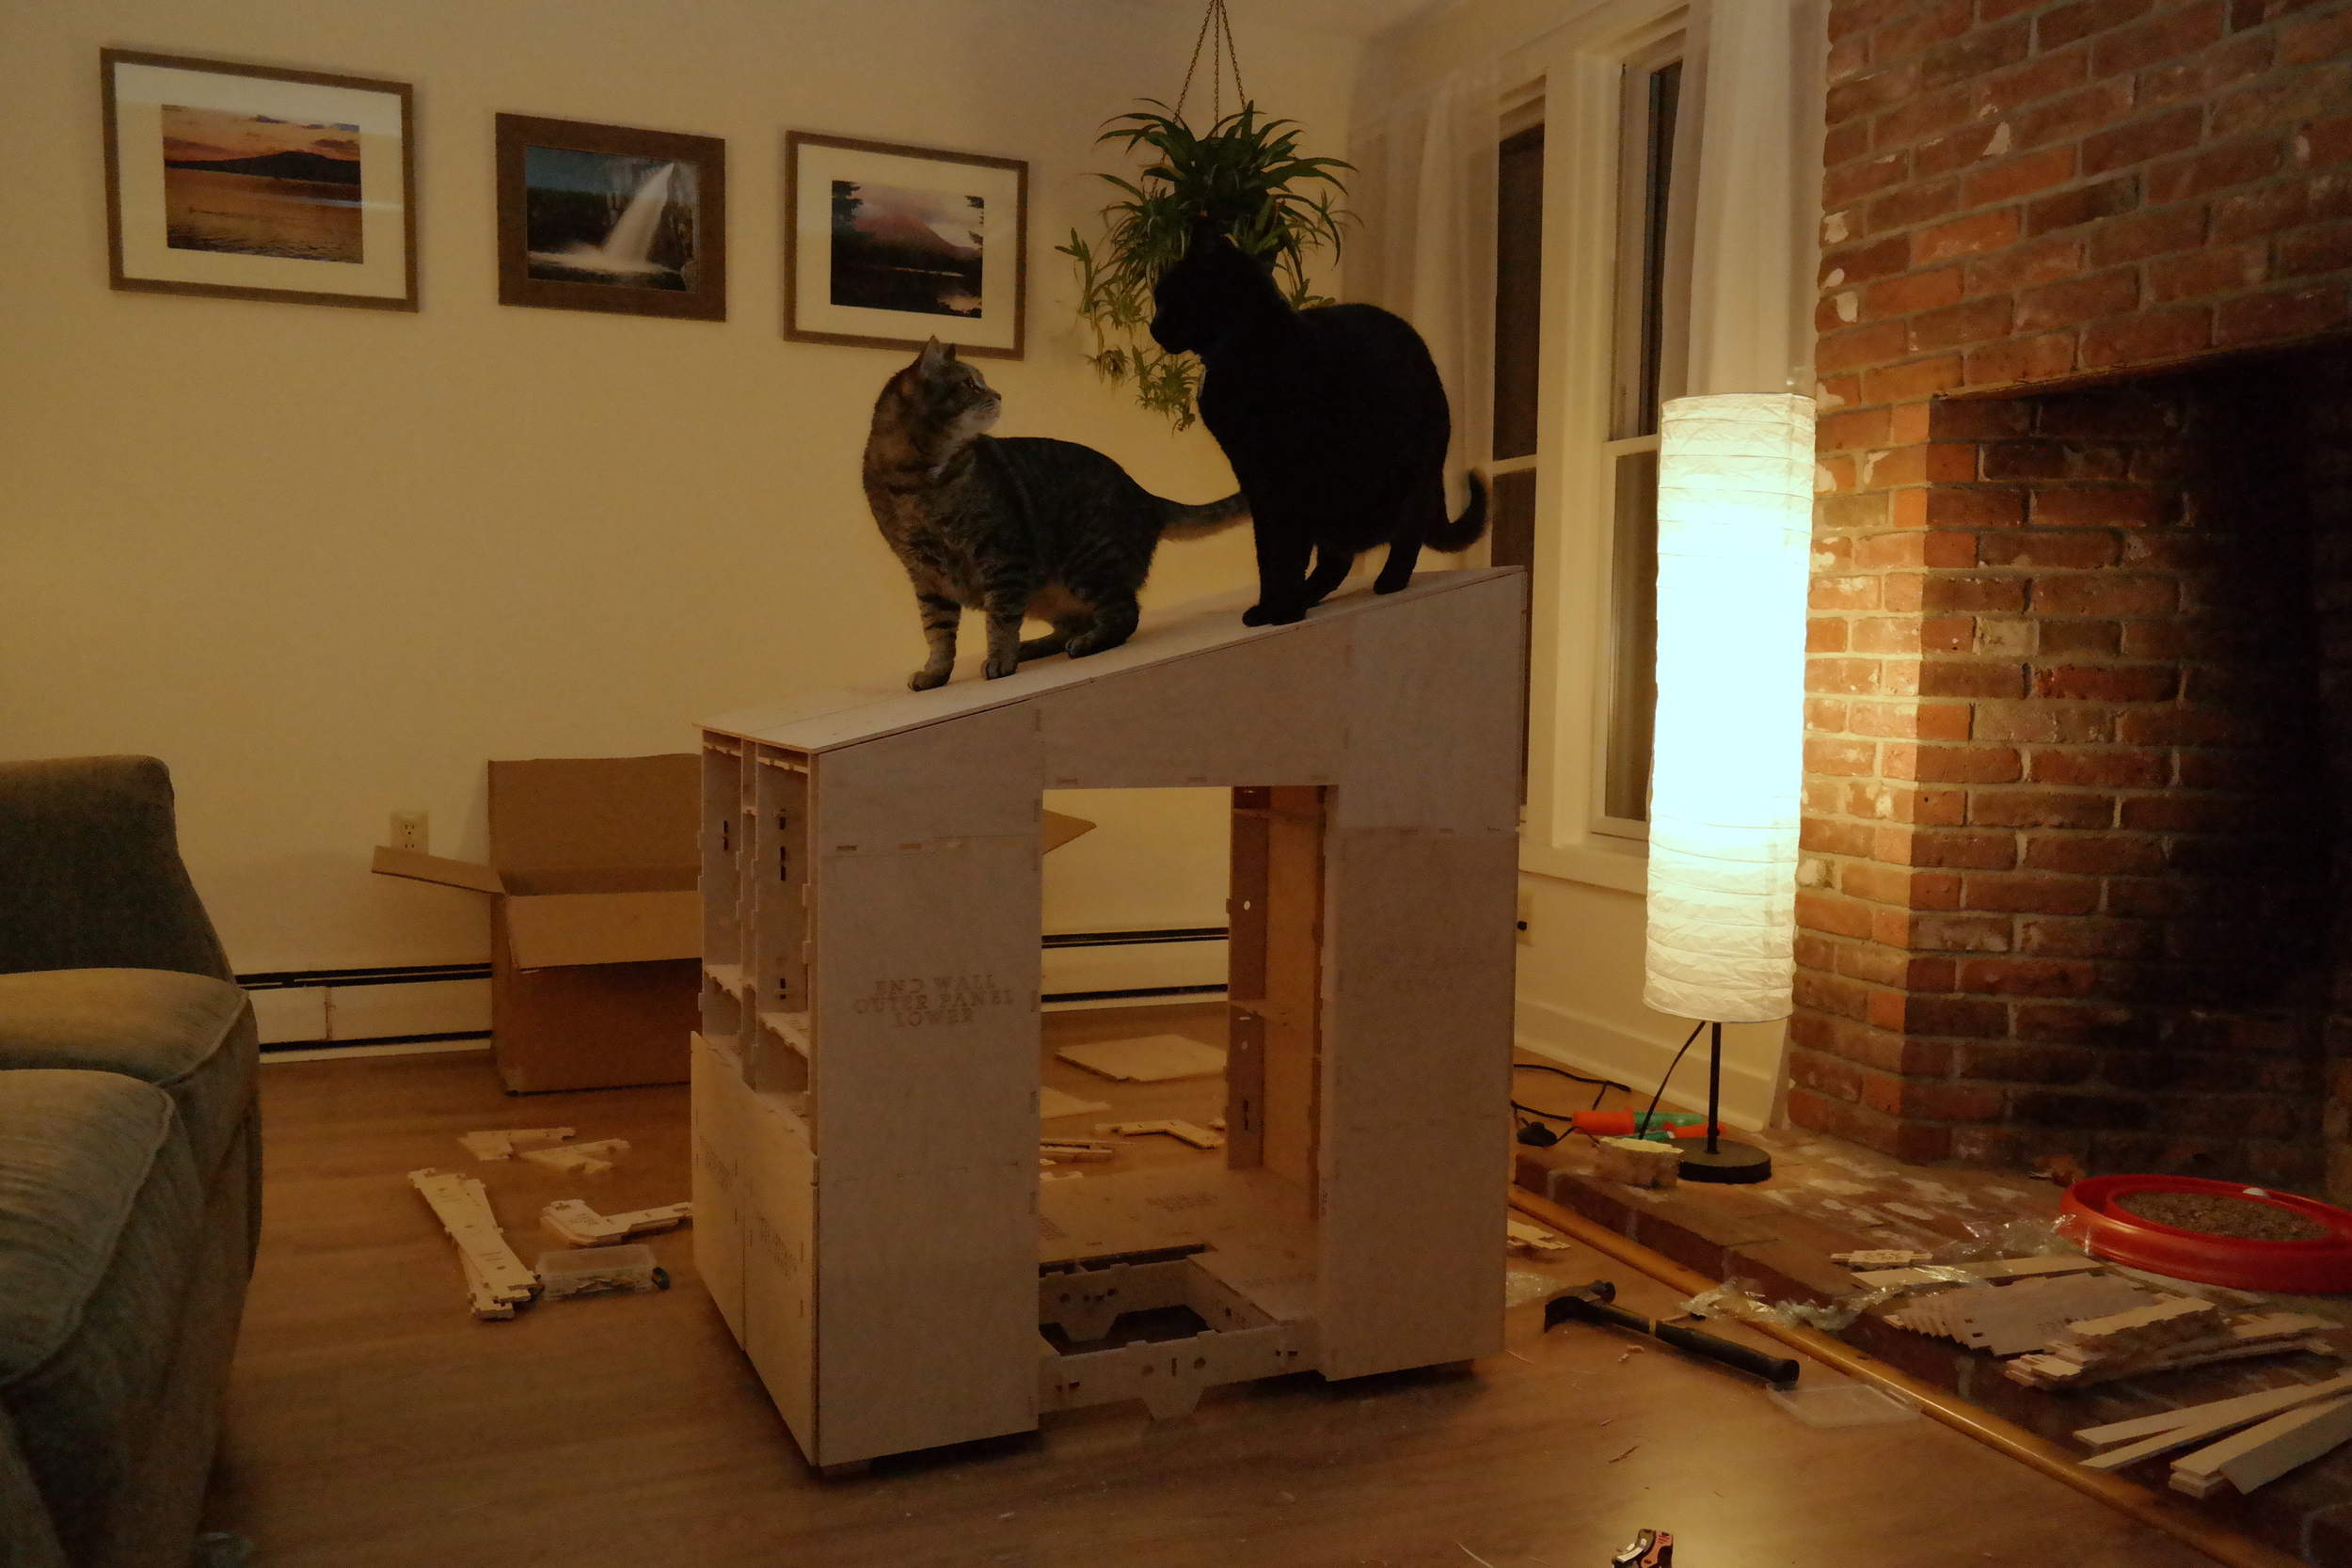 See! It's sturdy enough for two cats!